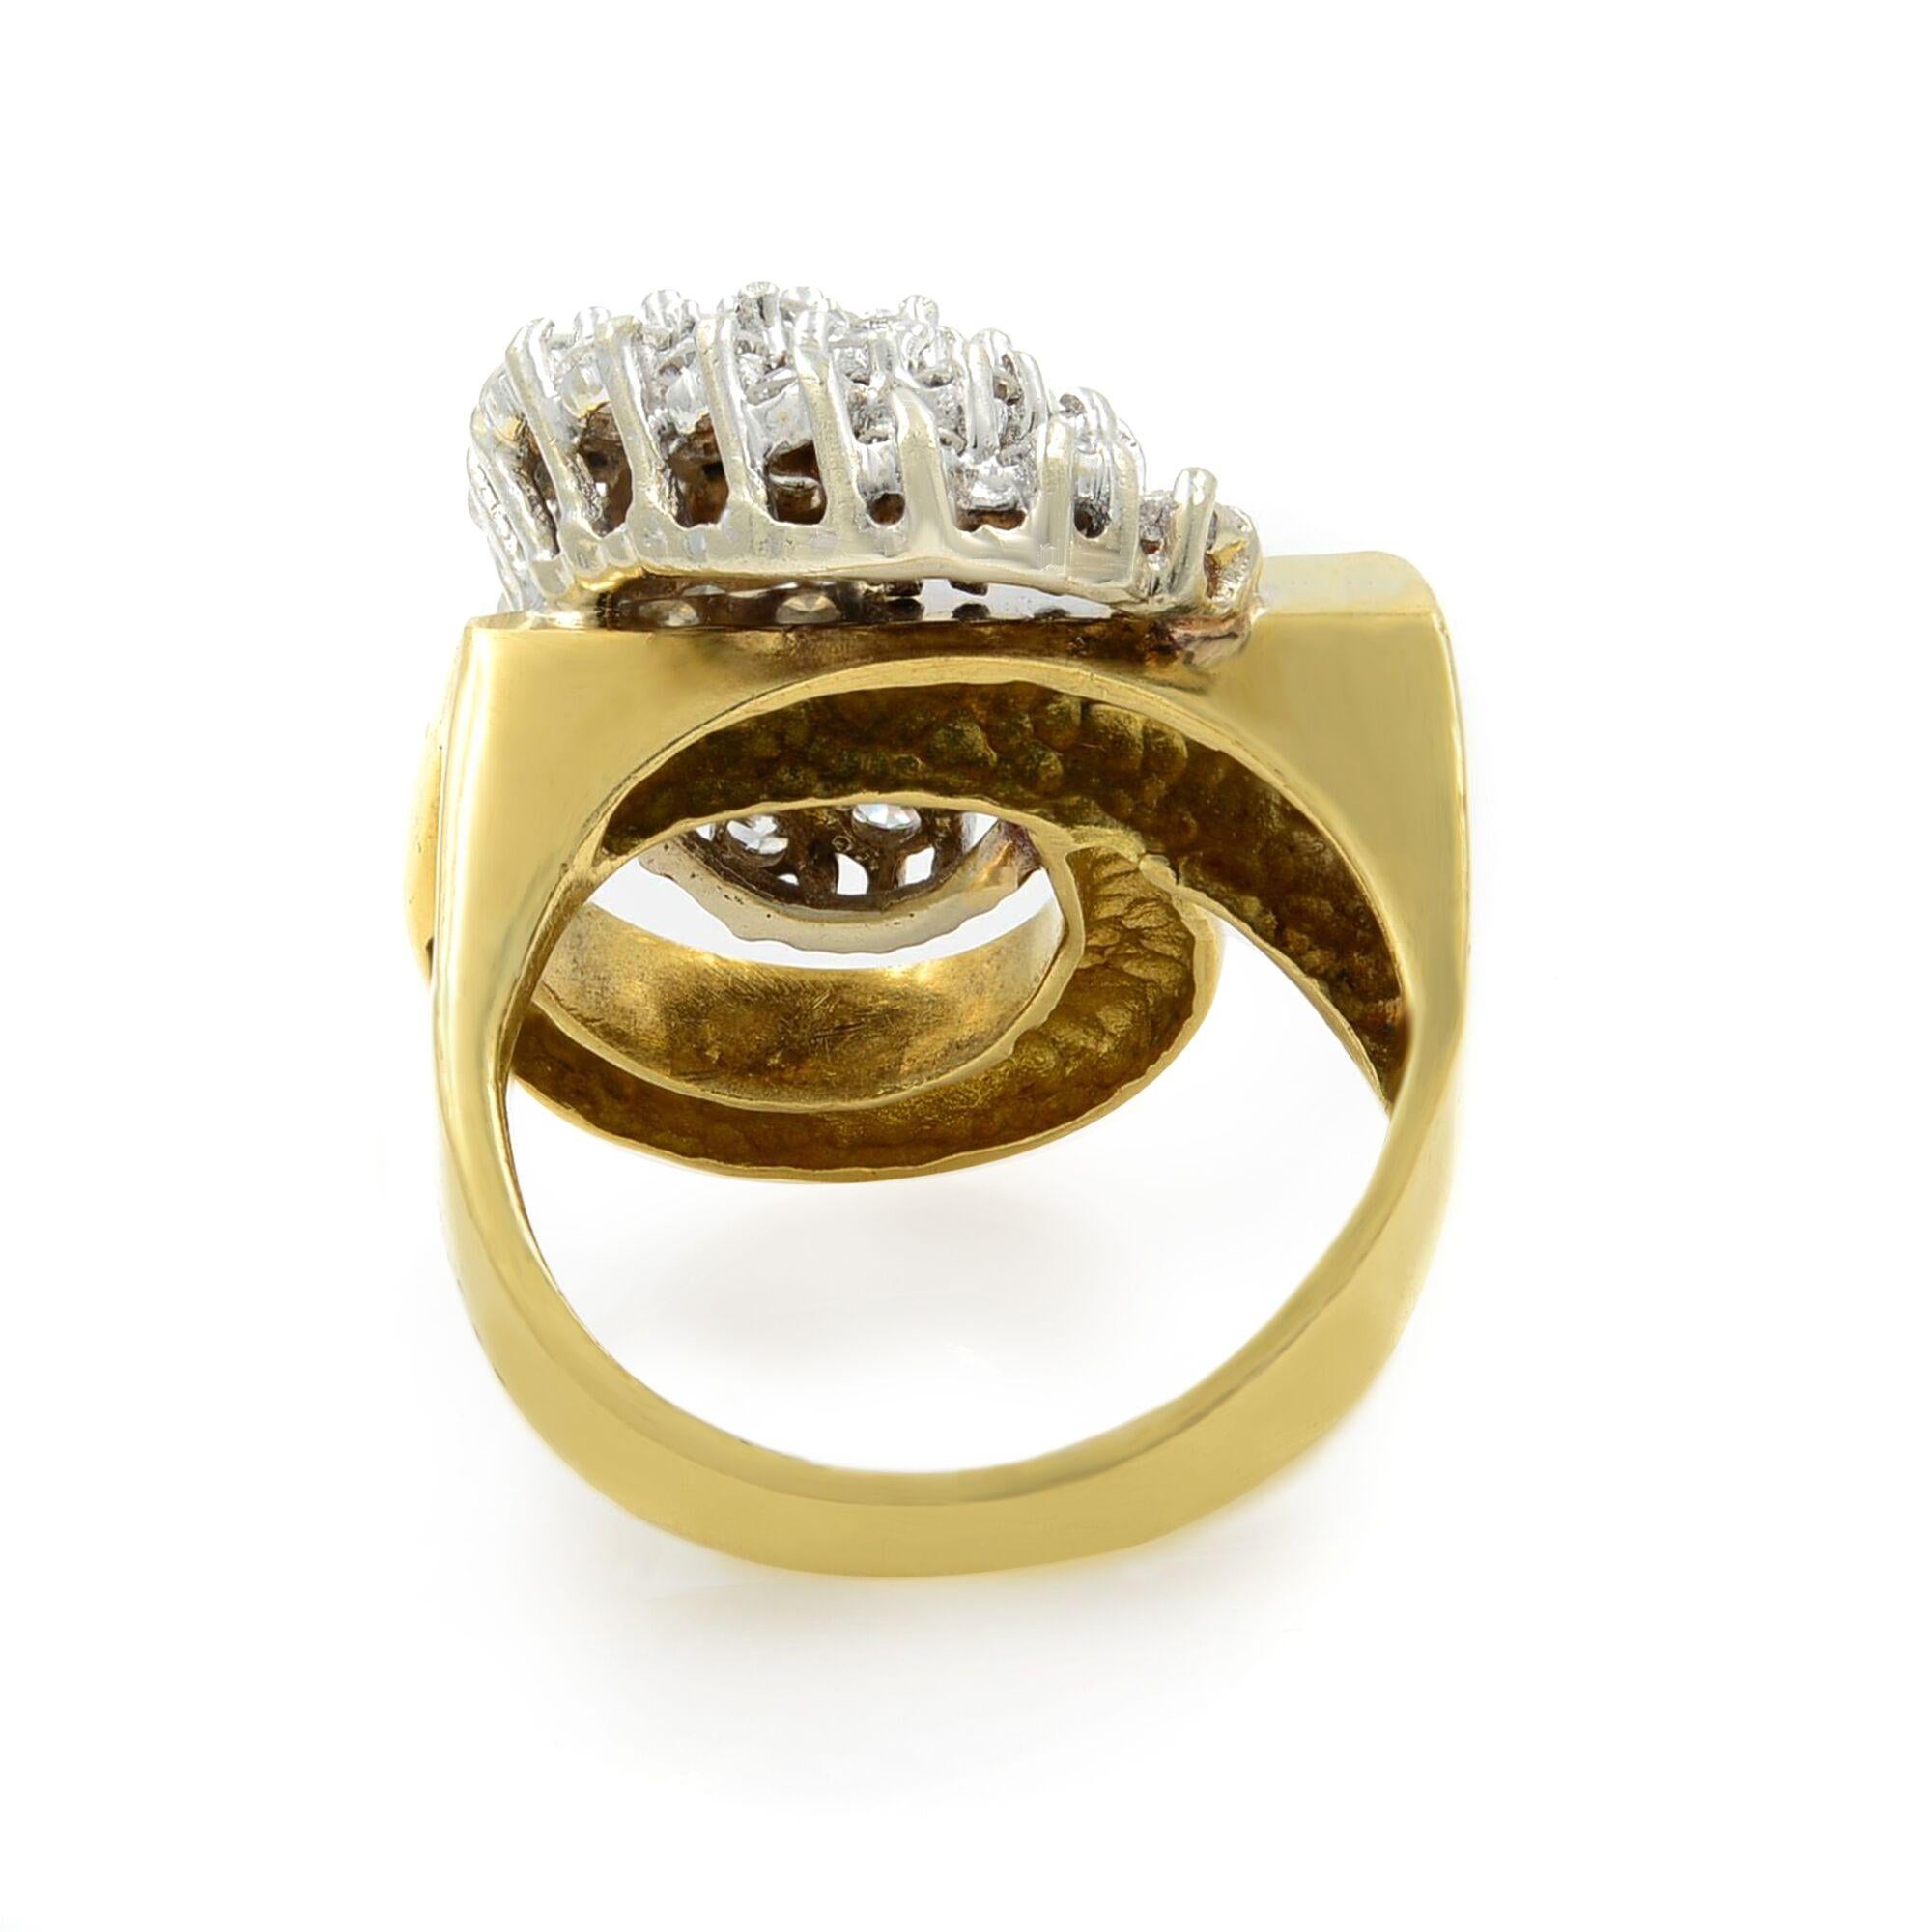 Vintage Round Cut Diamond Cocktail Ring 18K Yellow Gold 1.65Cttw In New Condition For Sale In New York, NY